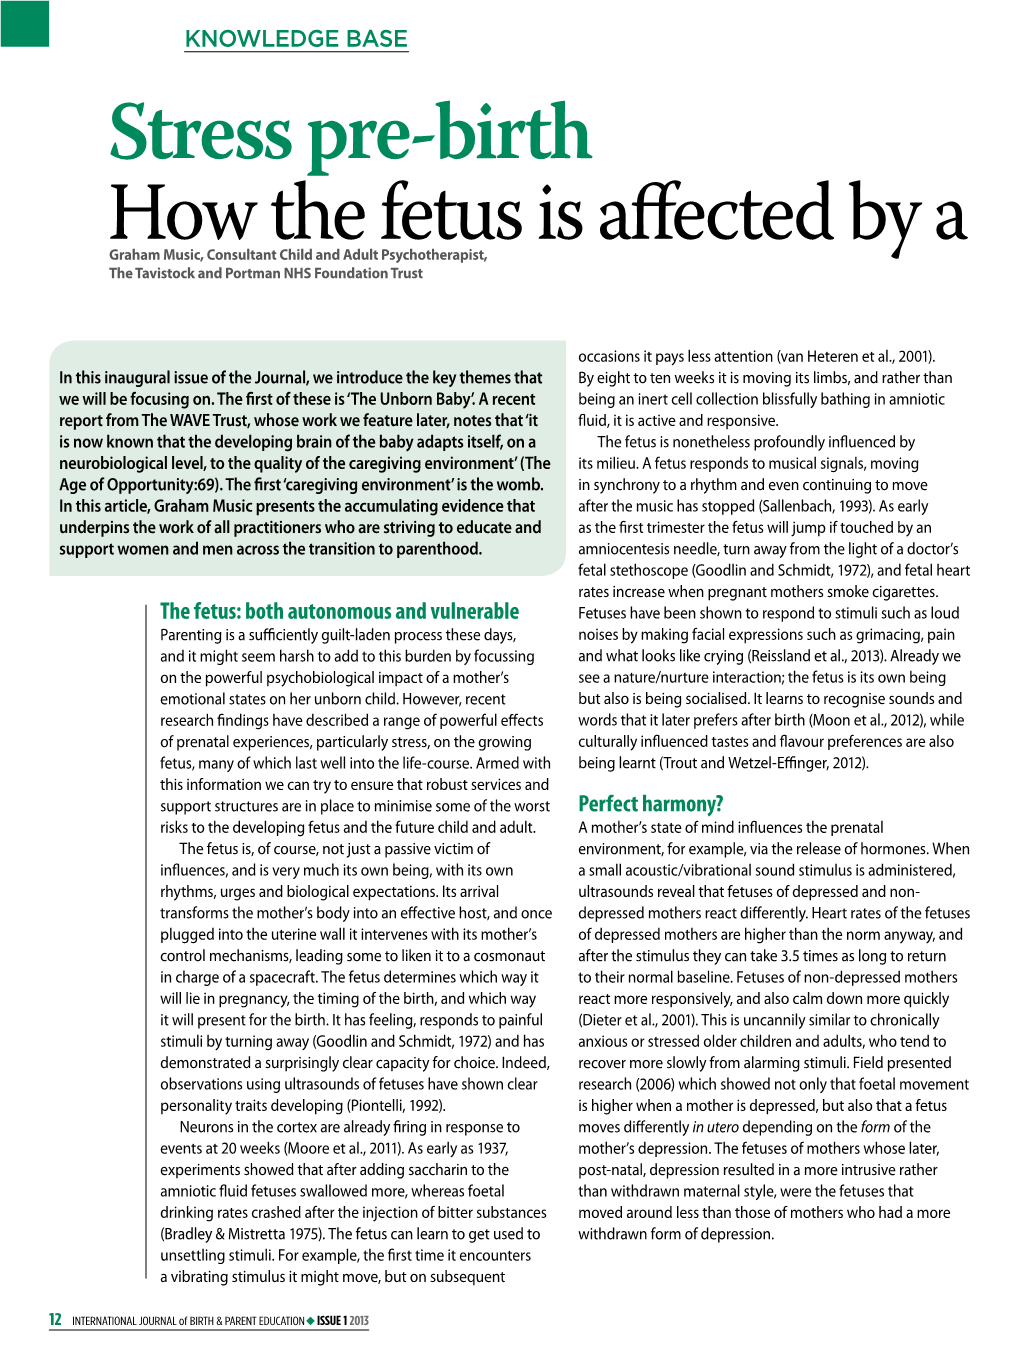 Stress Pre-Birth How the Fetus Is Affected by a Mother's Stat